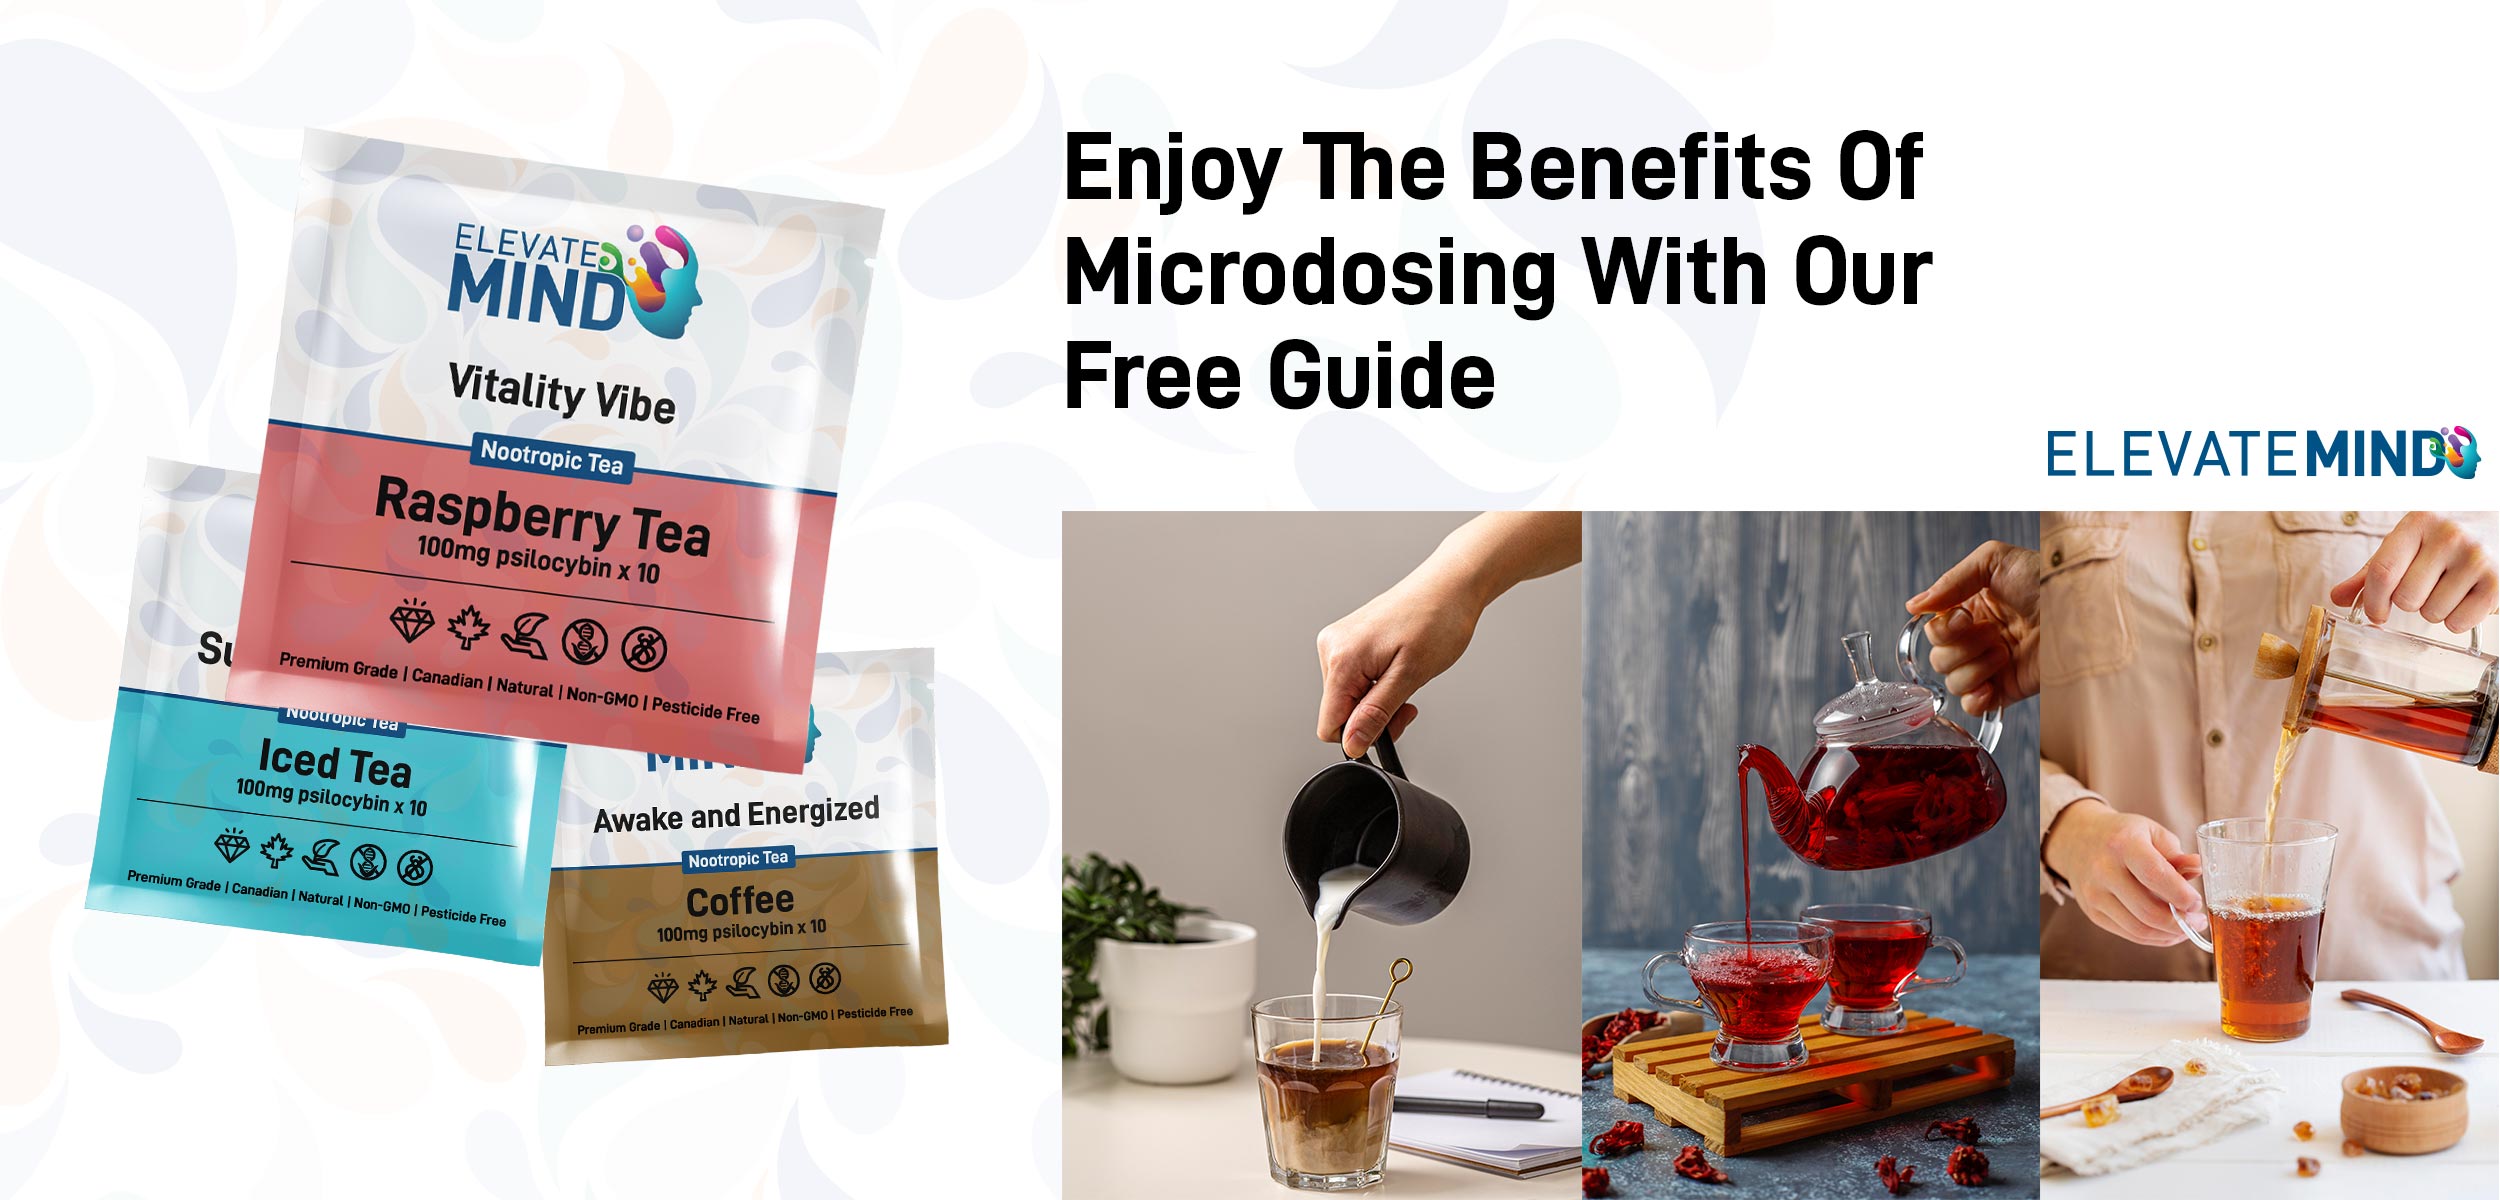 Enjoy the benefits of microdosing with our free guide